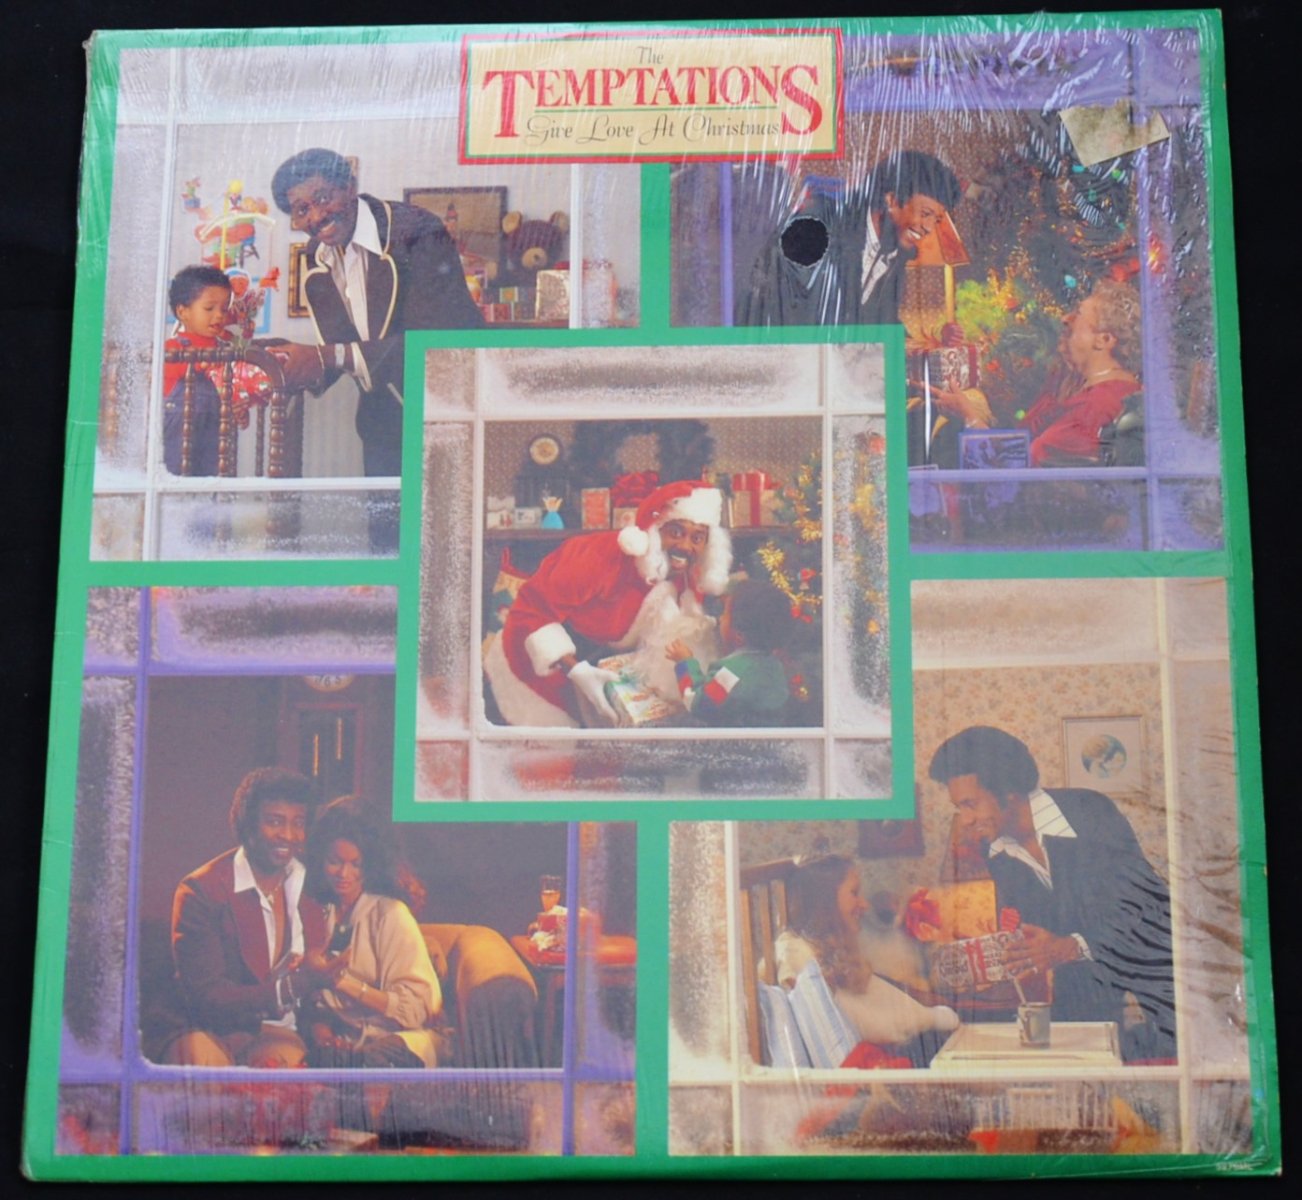 THE TEMPTATIONS / GIVE LOVE AT CHRISTMAS (LP)